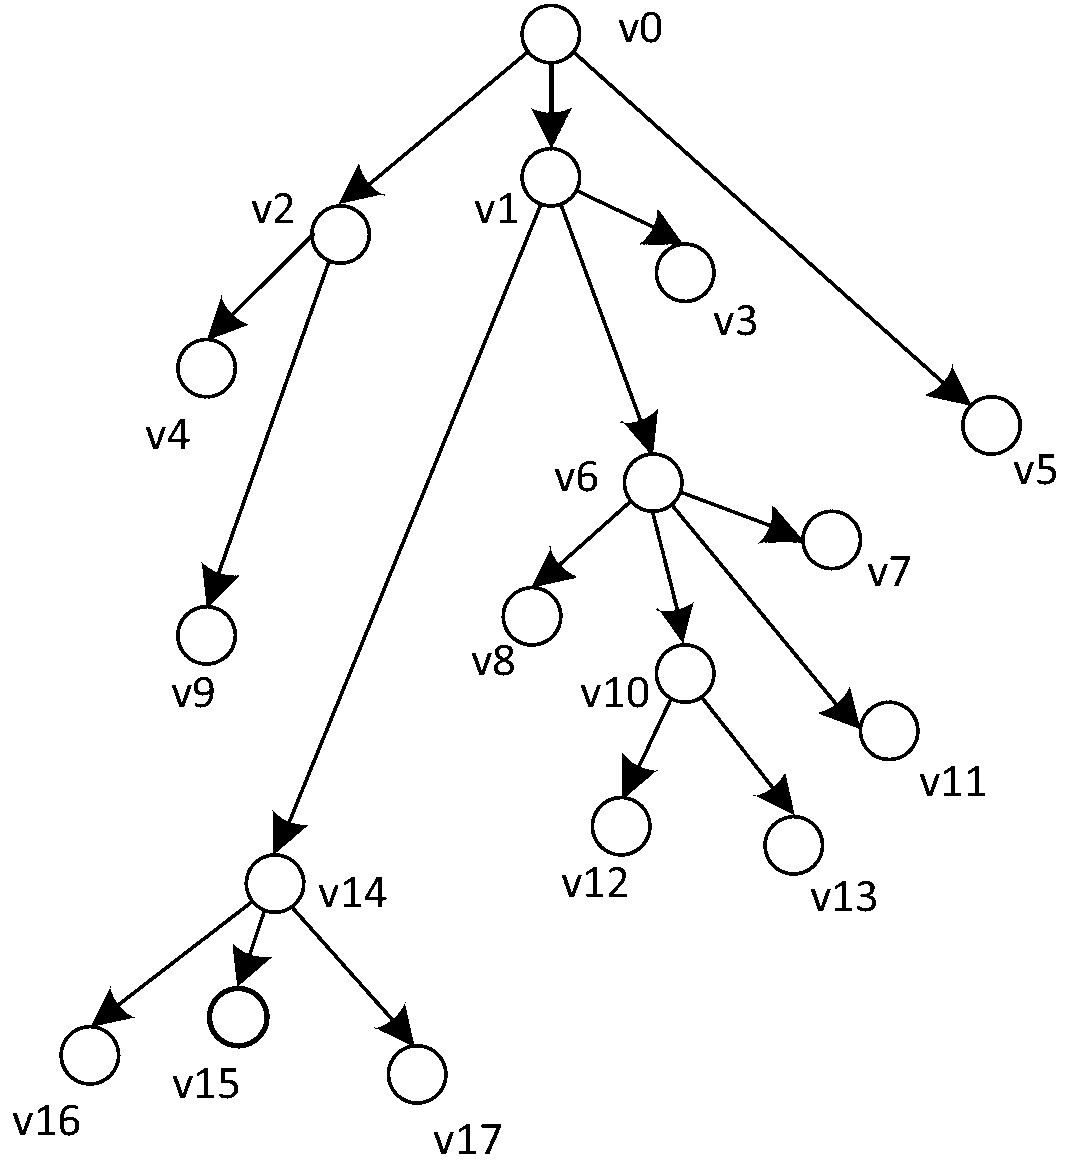 Method for building friend relationship transitive tree in social network